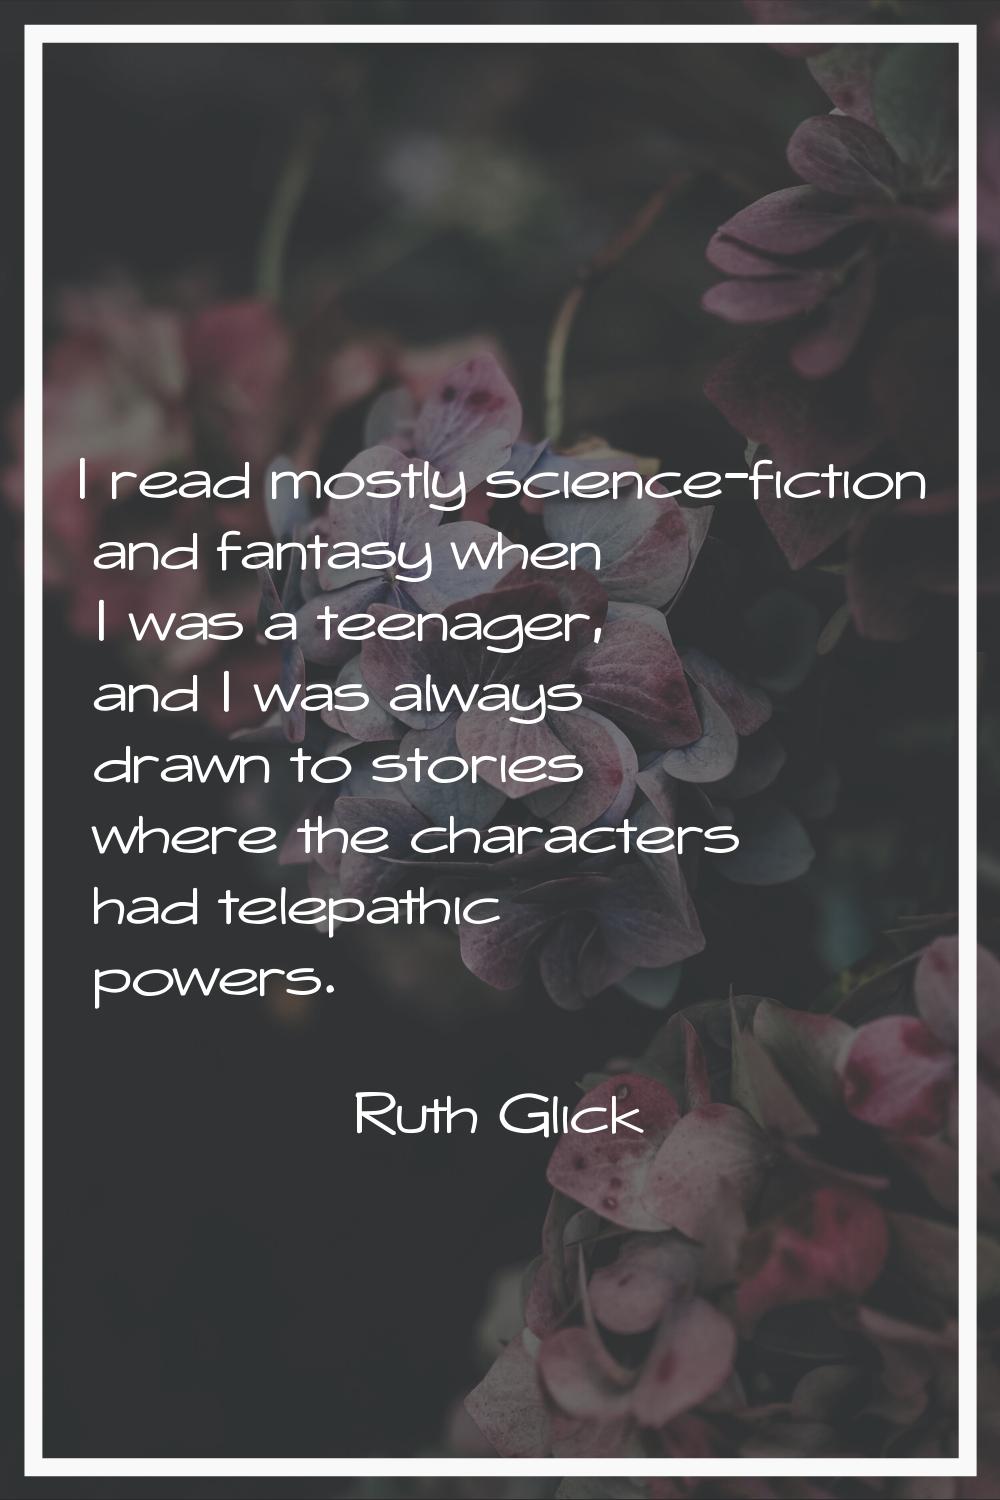 I read mostly science-fiction and fantasy when I was a teenager, and I was always drawn to stories 